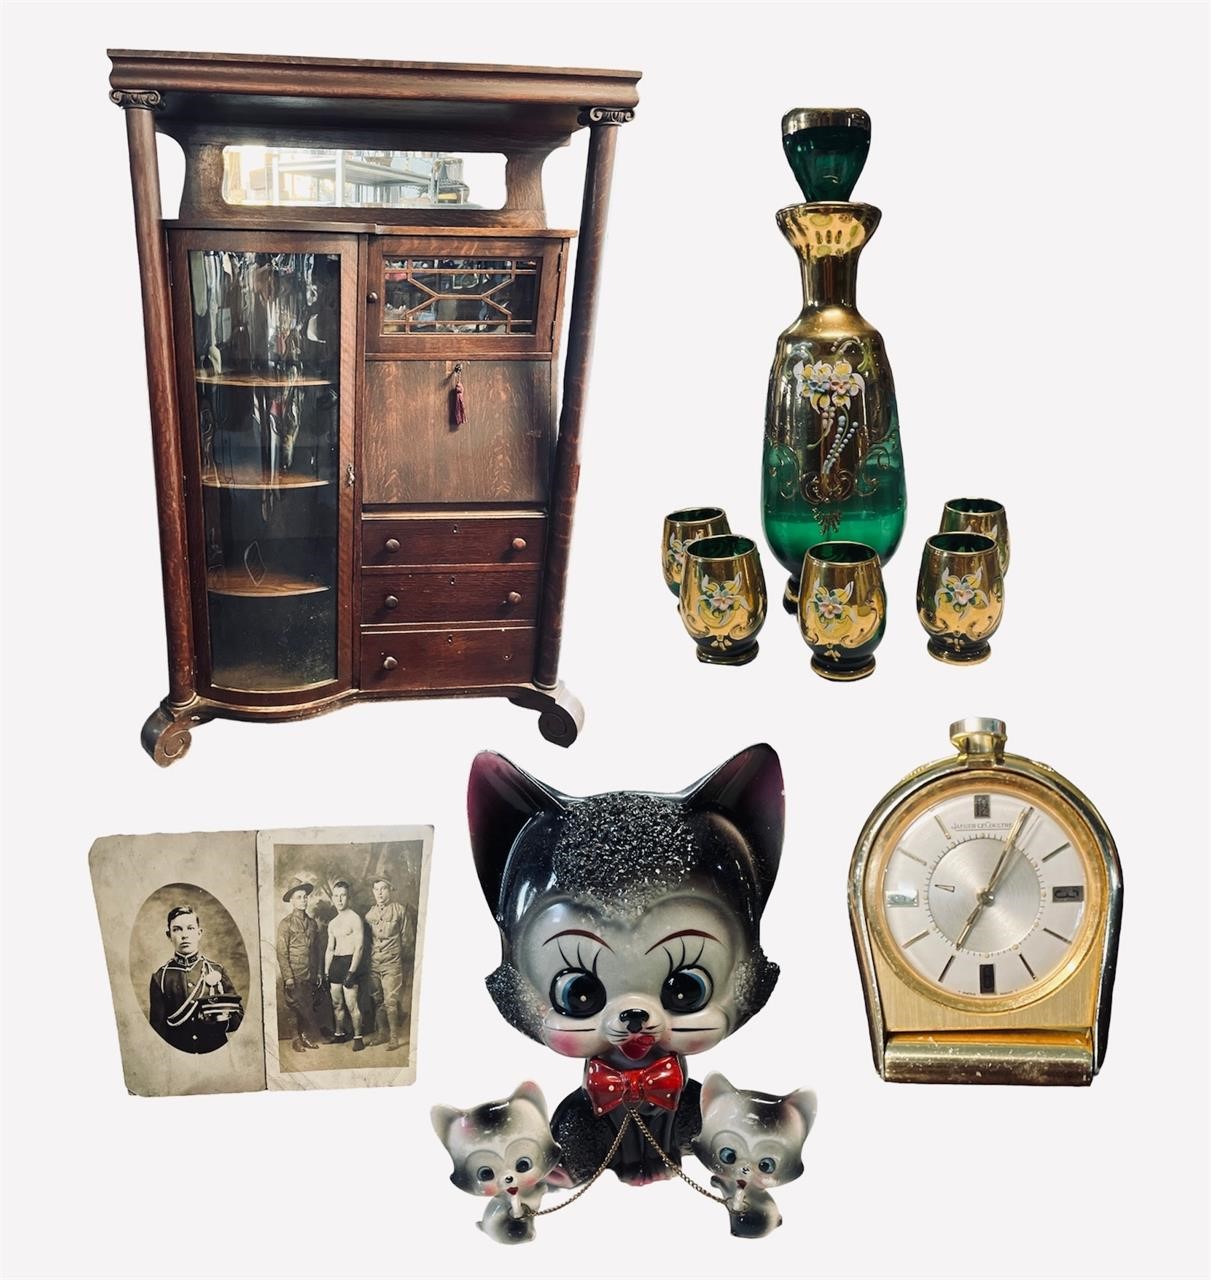 703 Lots of Antiques & Collectibles